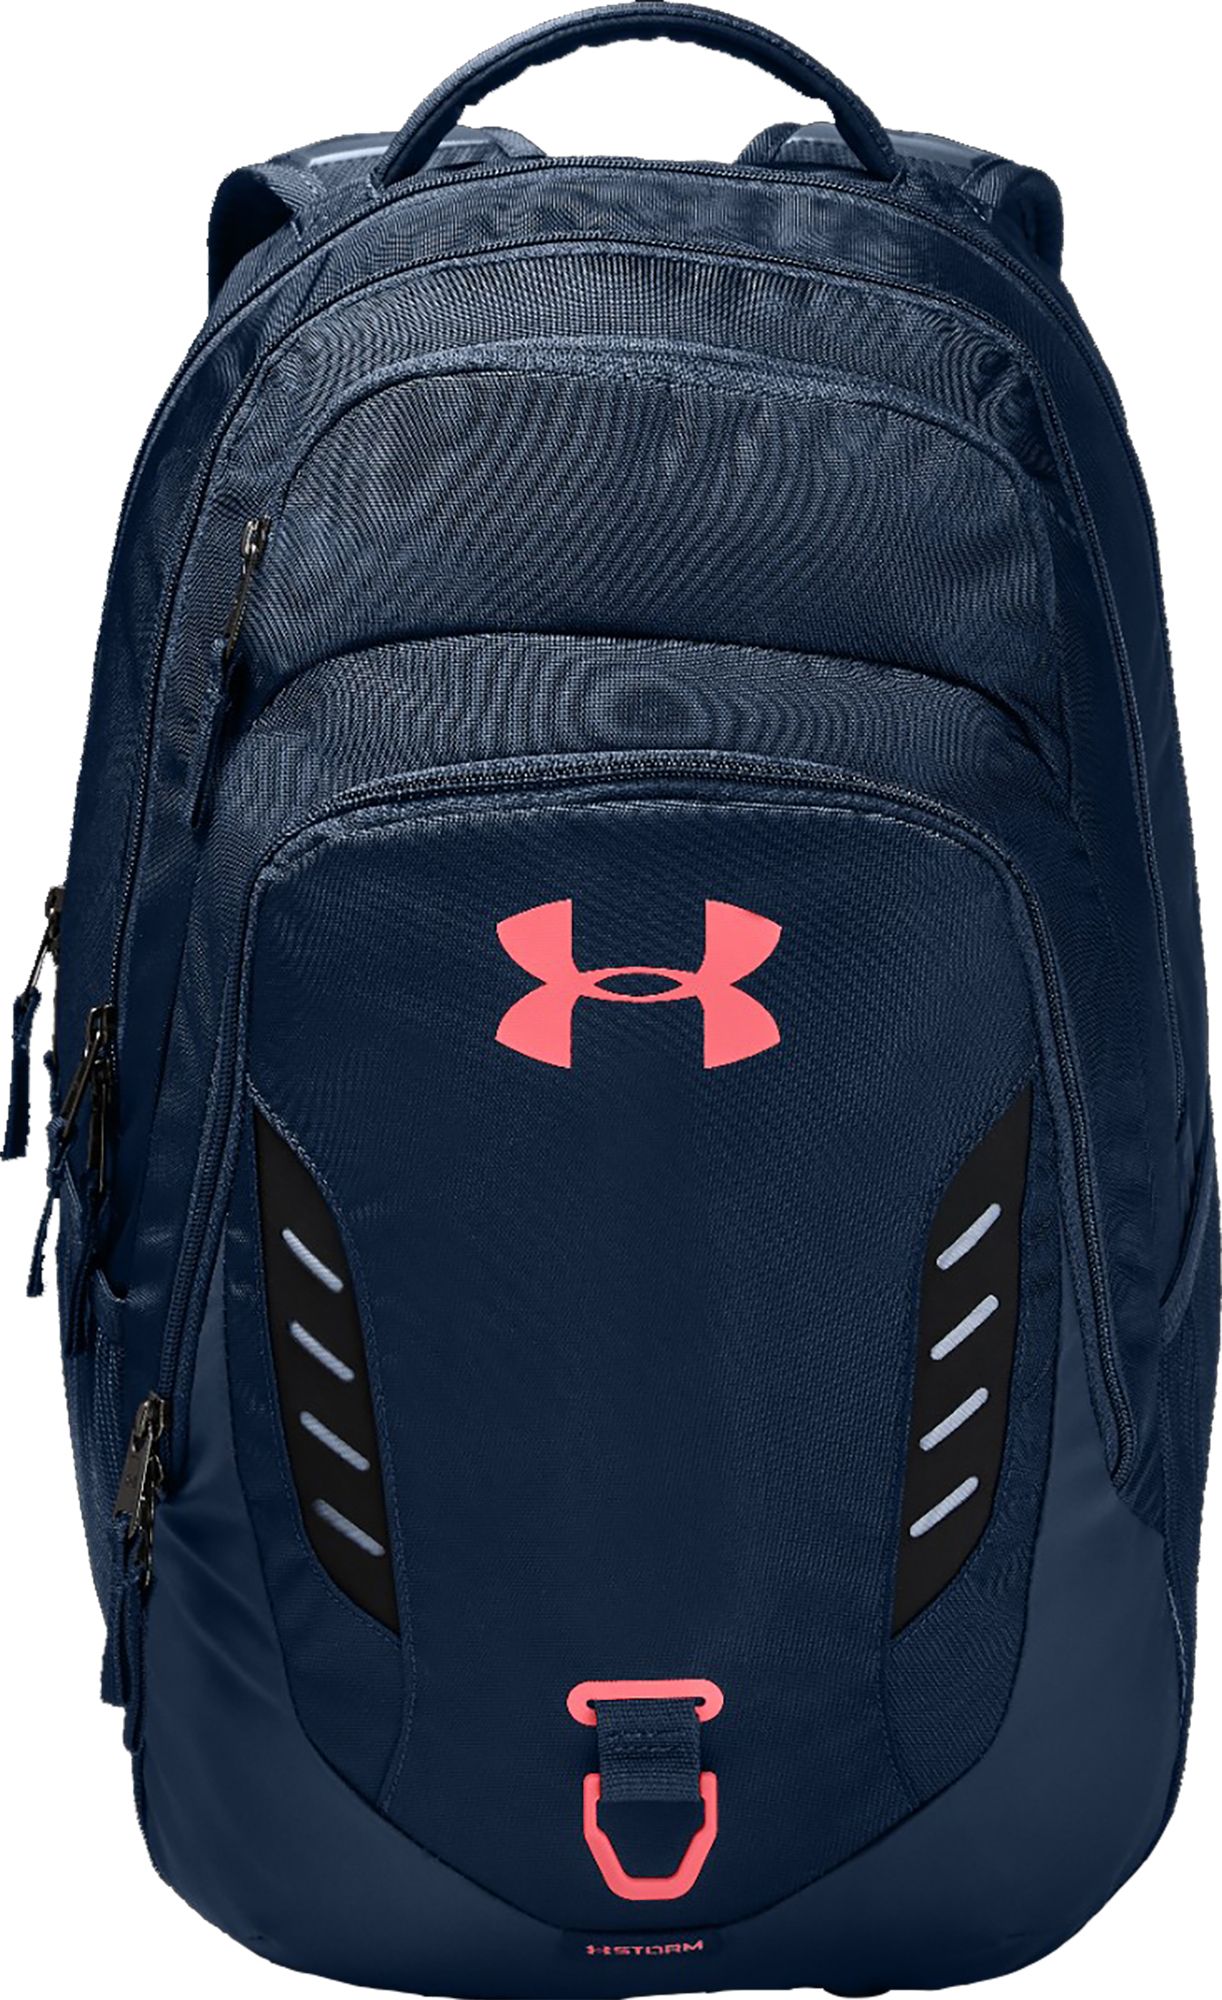 red white and blue under armour backpack